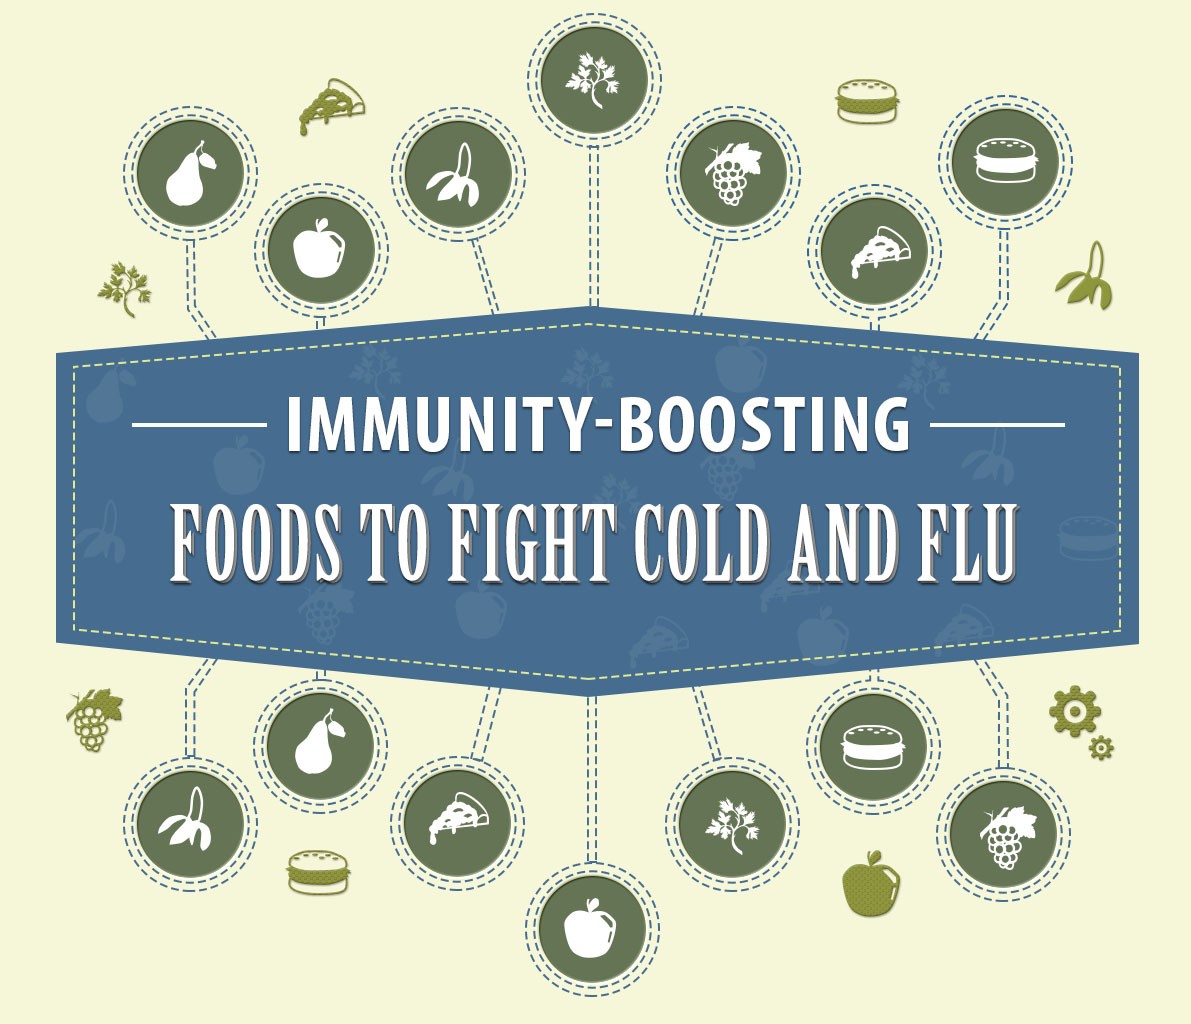 Foods to Fight Cold and flu